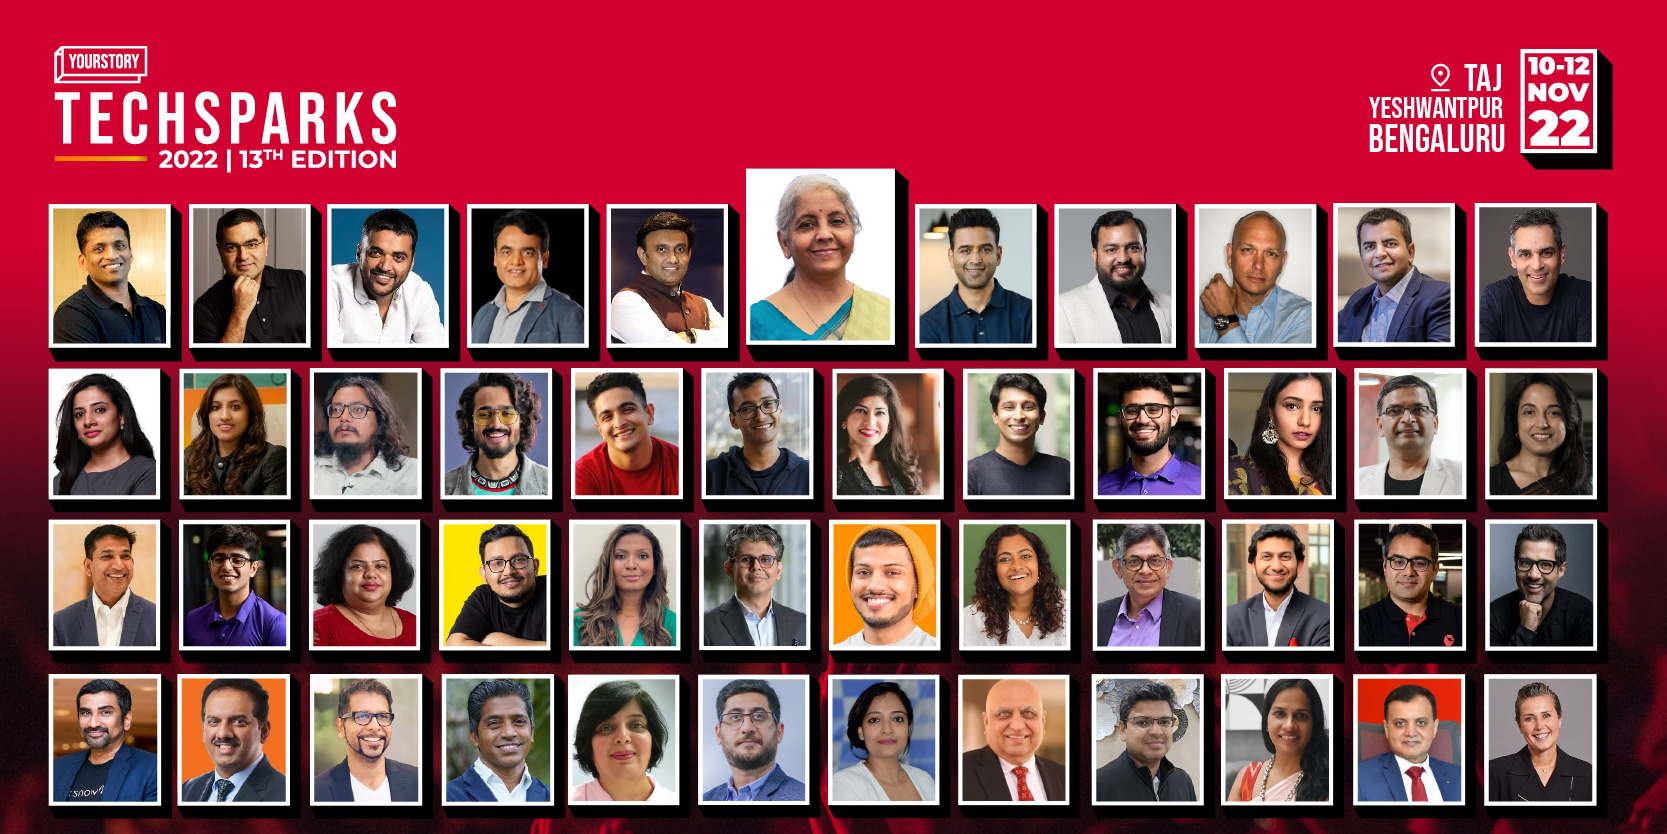 FM Nirmala Sitharaman, creator of the iPod, and Nithin Kamath: 10 things to look forward to at TechSparks 2022